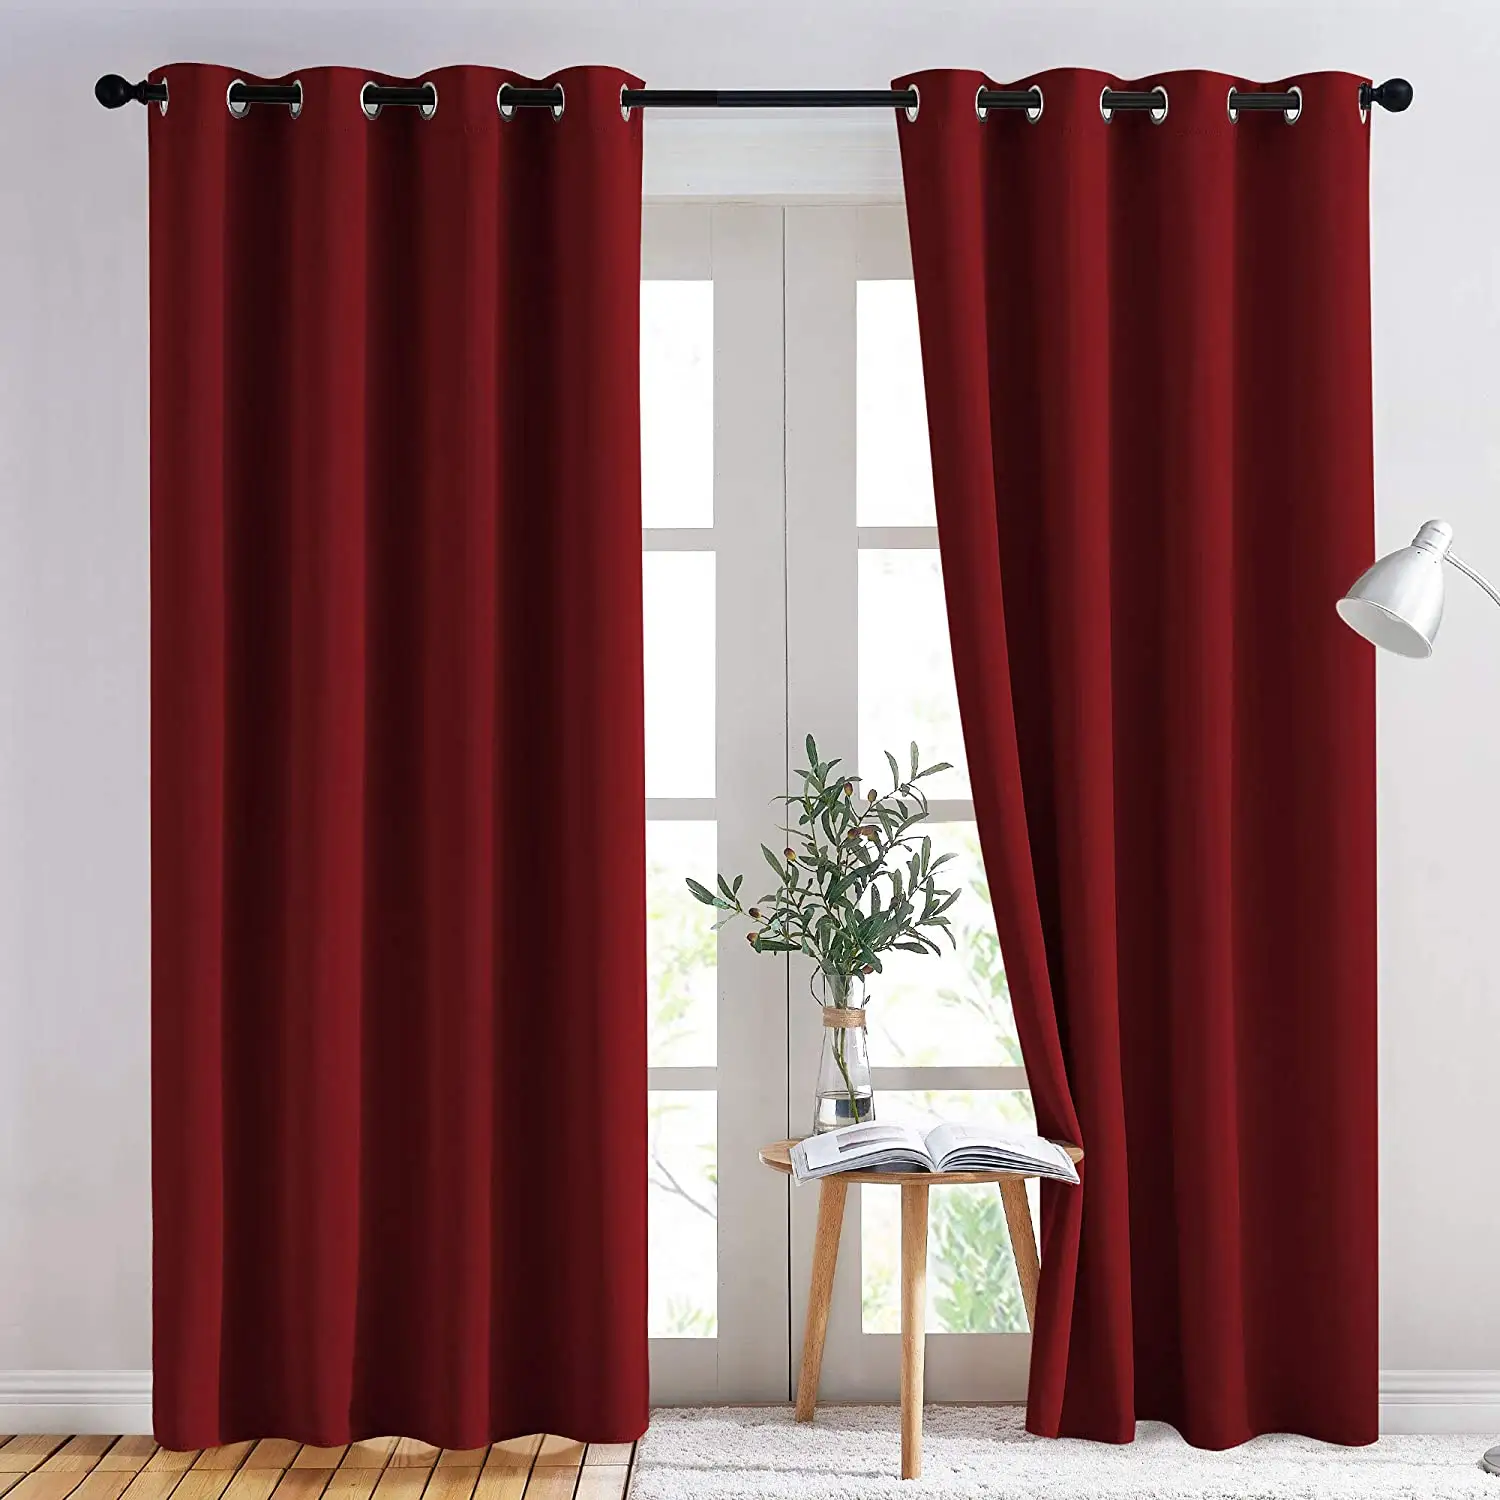 Wholesale Polyester Blackout Curtains Grommet Thermal Insulated Room Darkening Curtains for Living Room, Bedroom